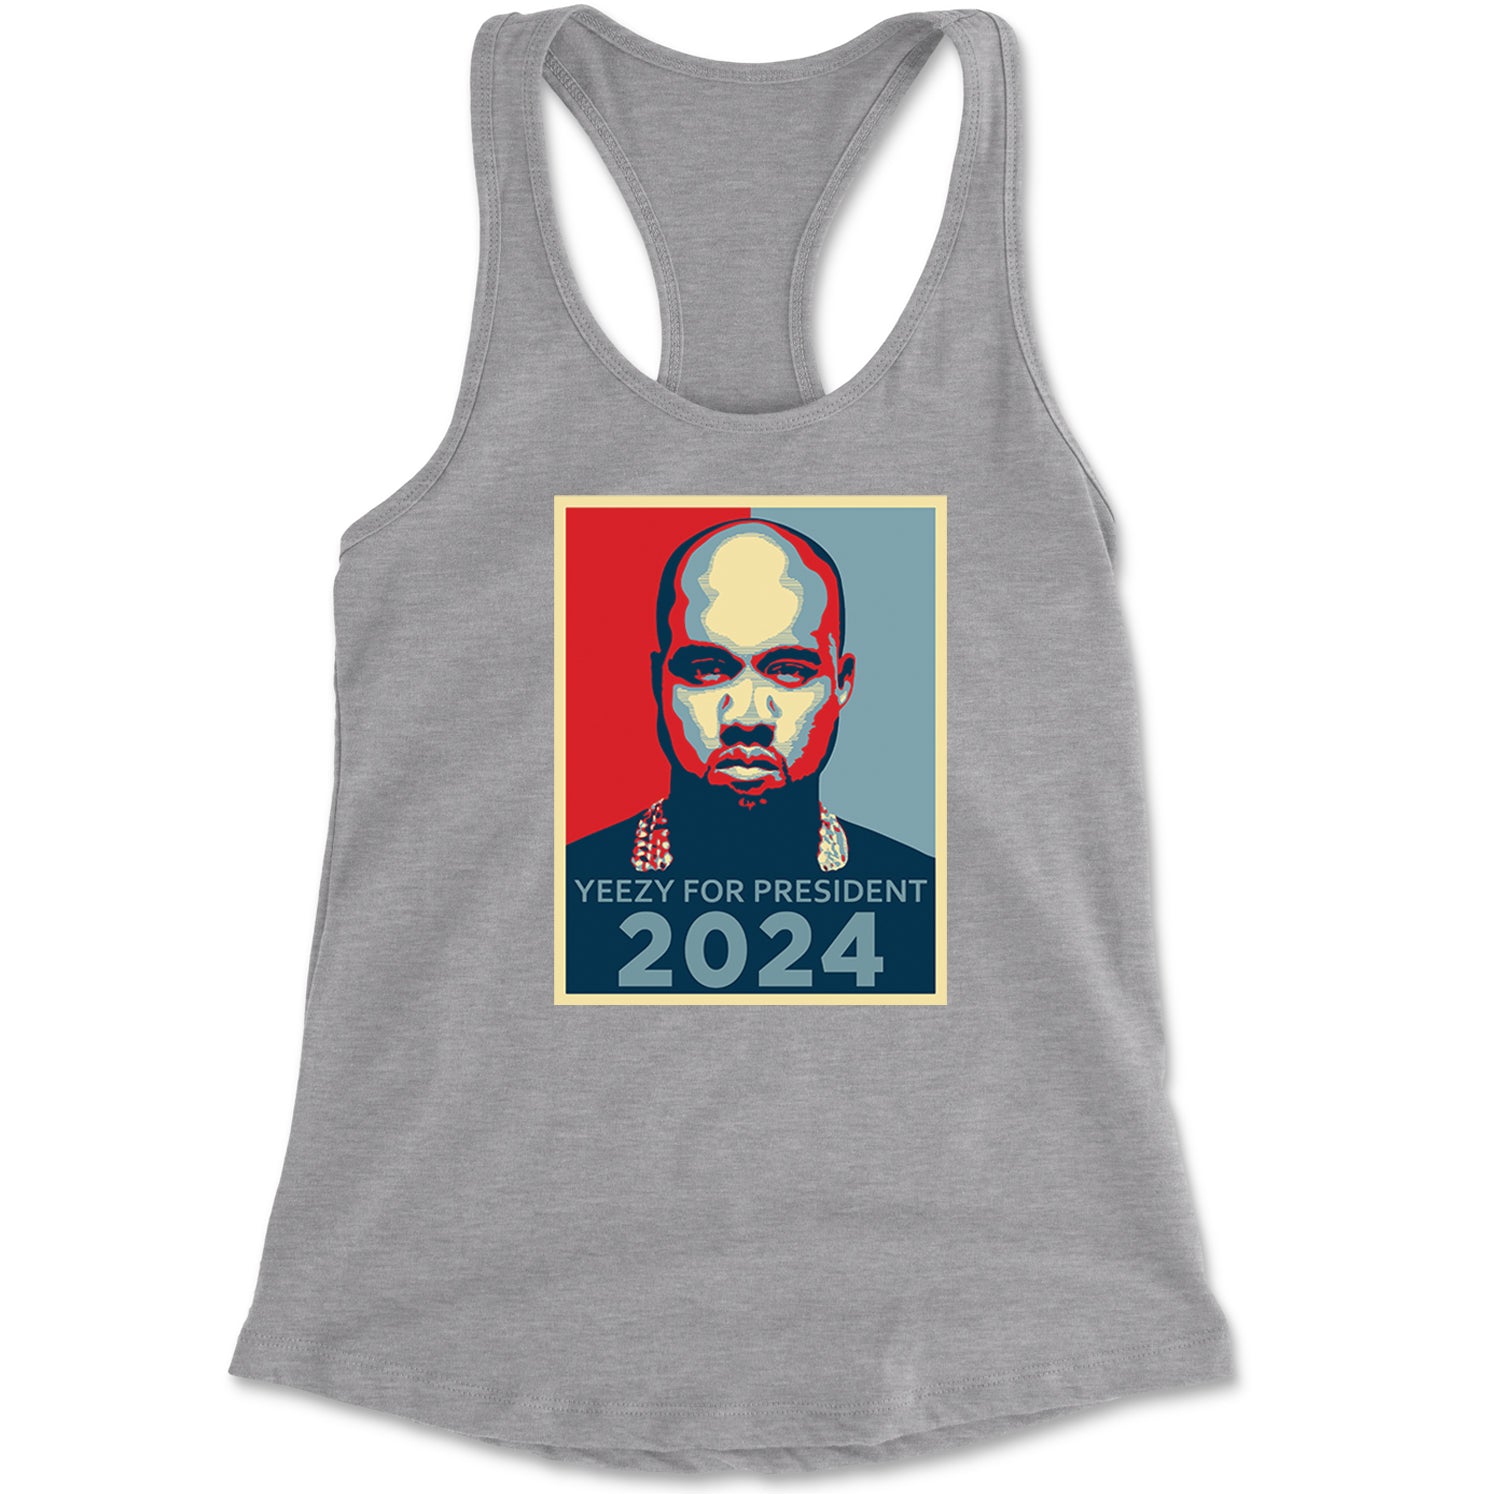 Yeezus For President Vote for Ye Racerback Tank Top for Women Heather Grey